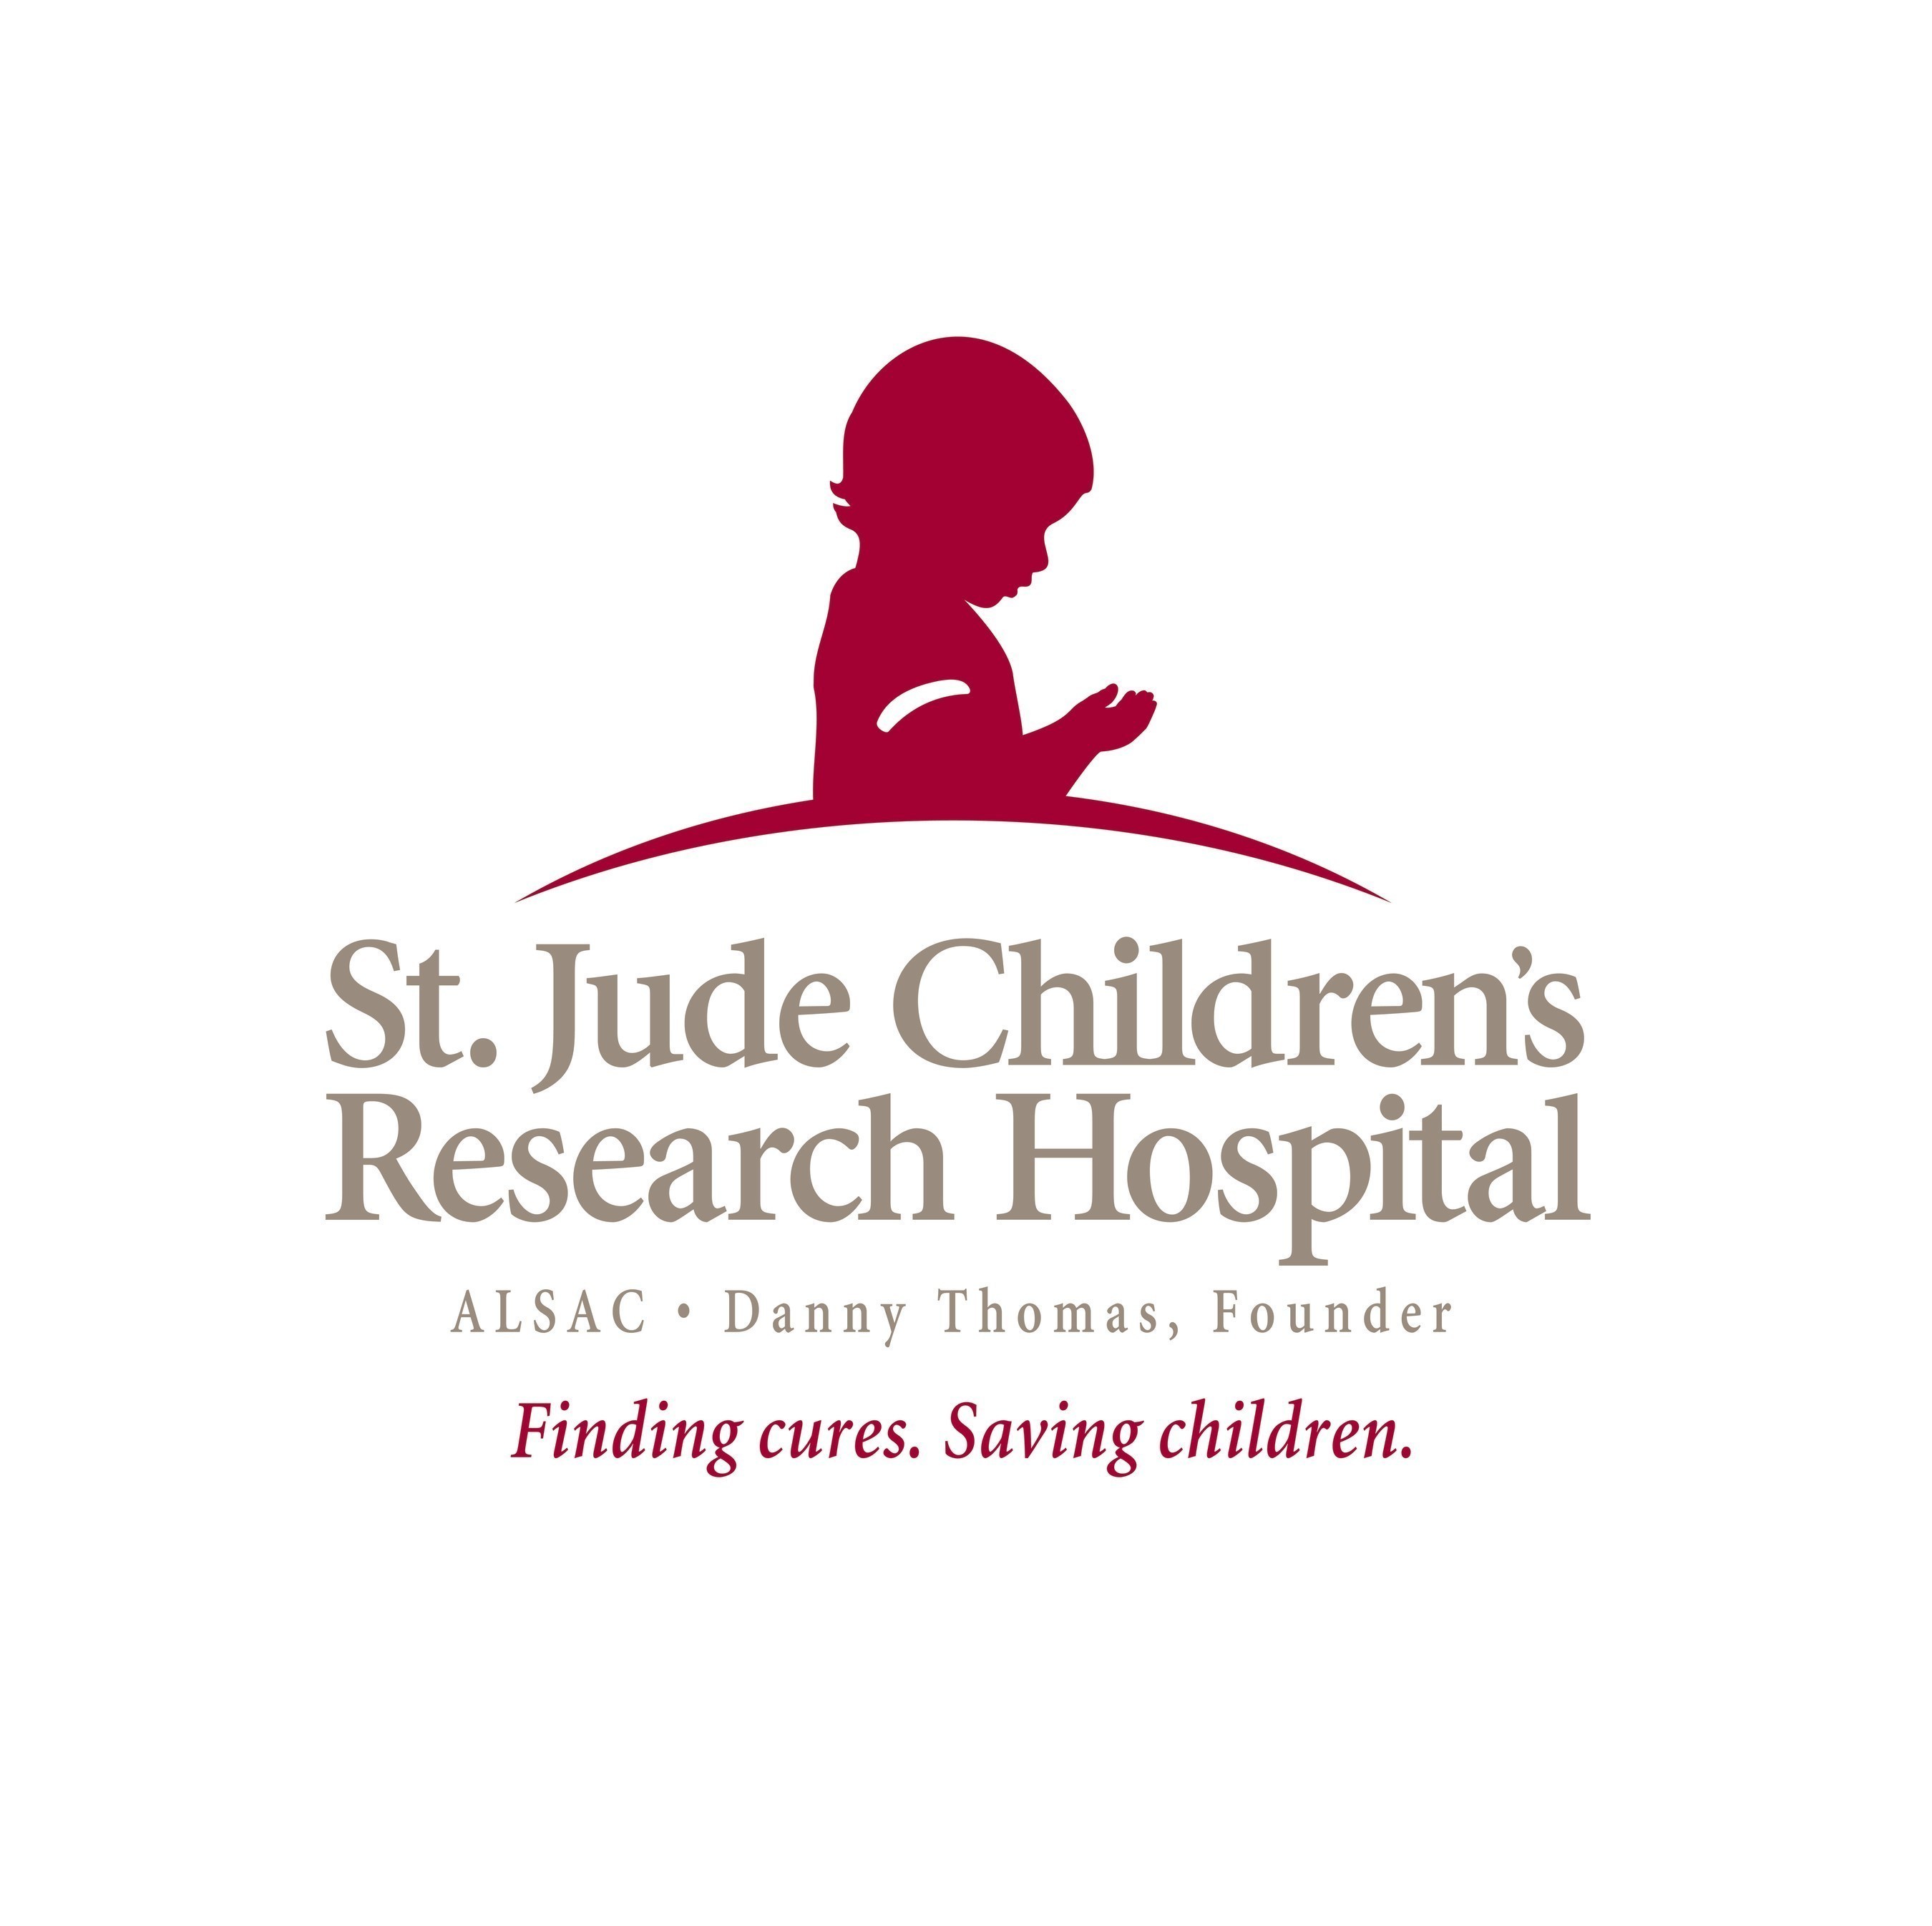 Media Statement from St. Jude Children's Research Hospital® Issued